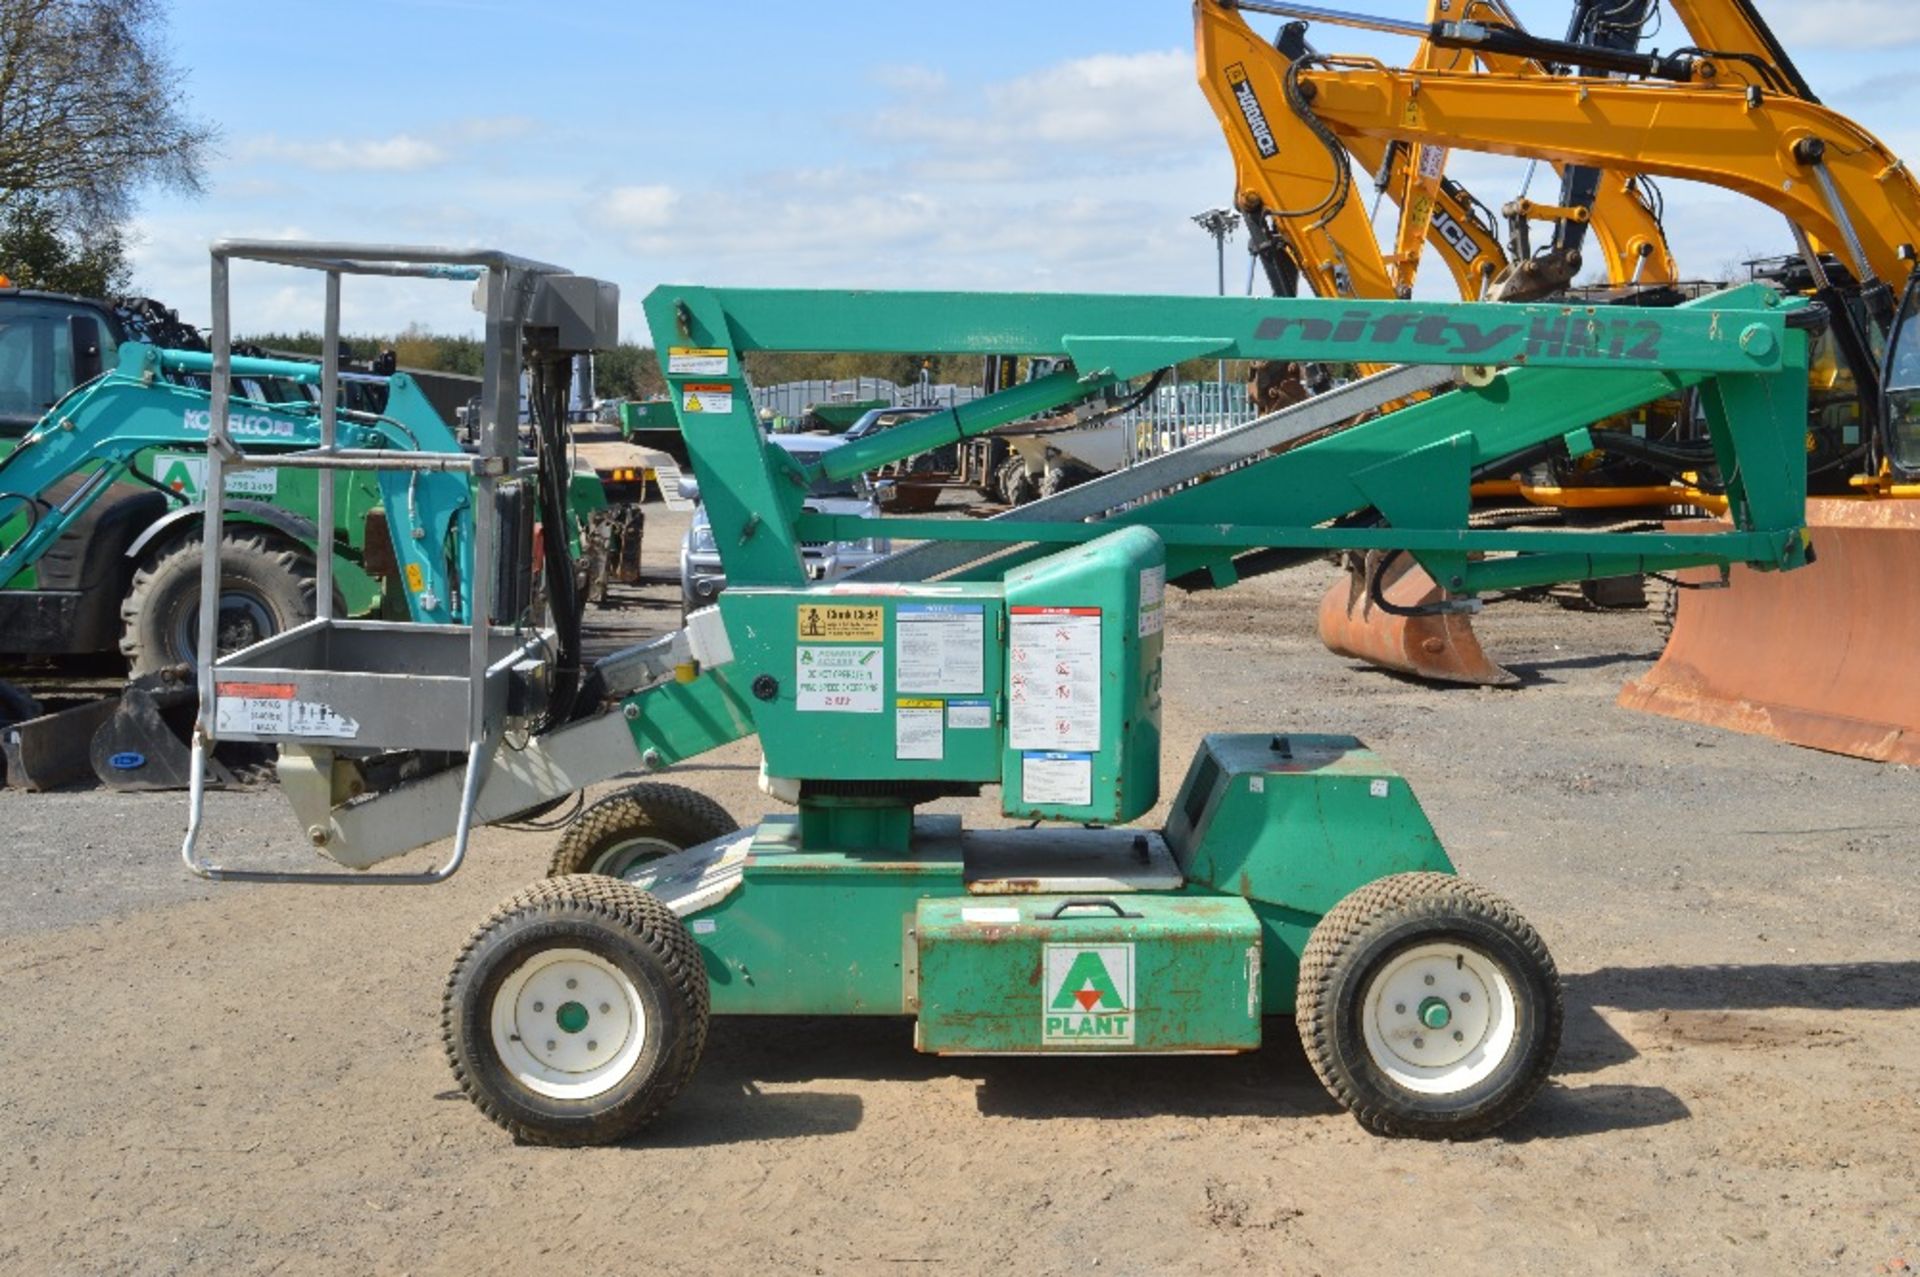 Nifty Lift HR 12 NDE diesel electric 12 metre boom lift   Year: 2007 S/N: 1217170 A448715 - Image 3 of 8